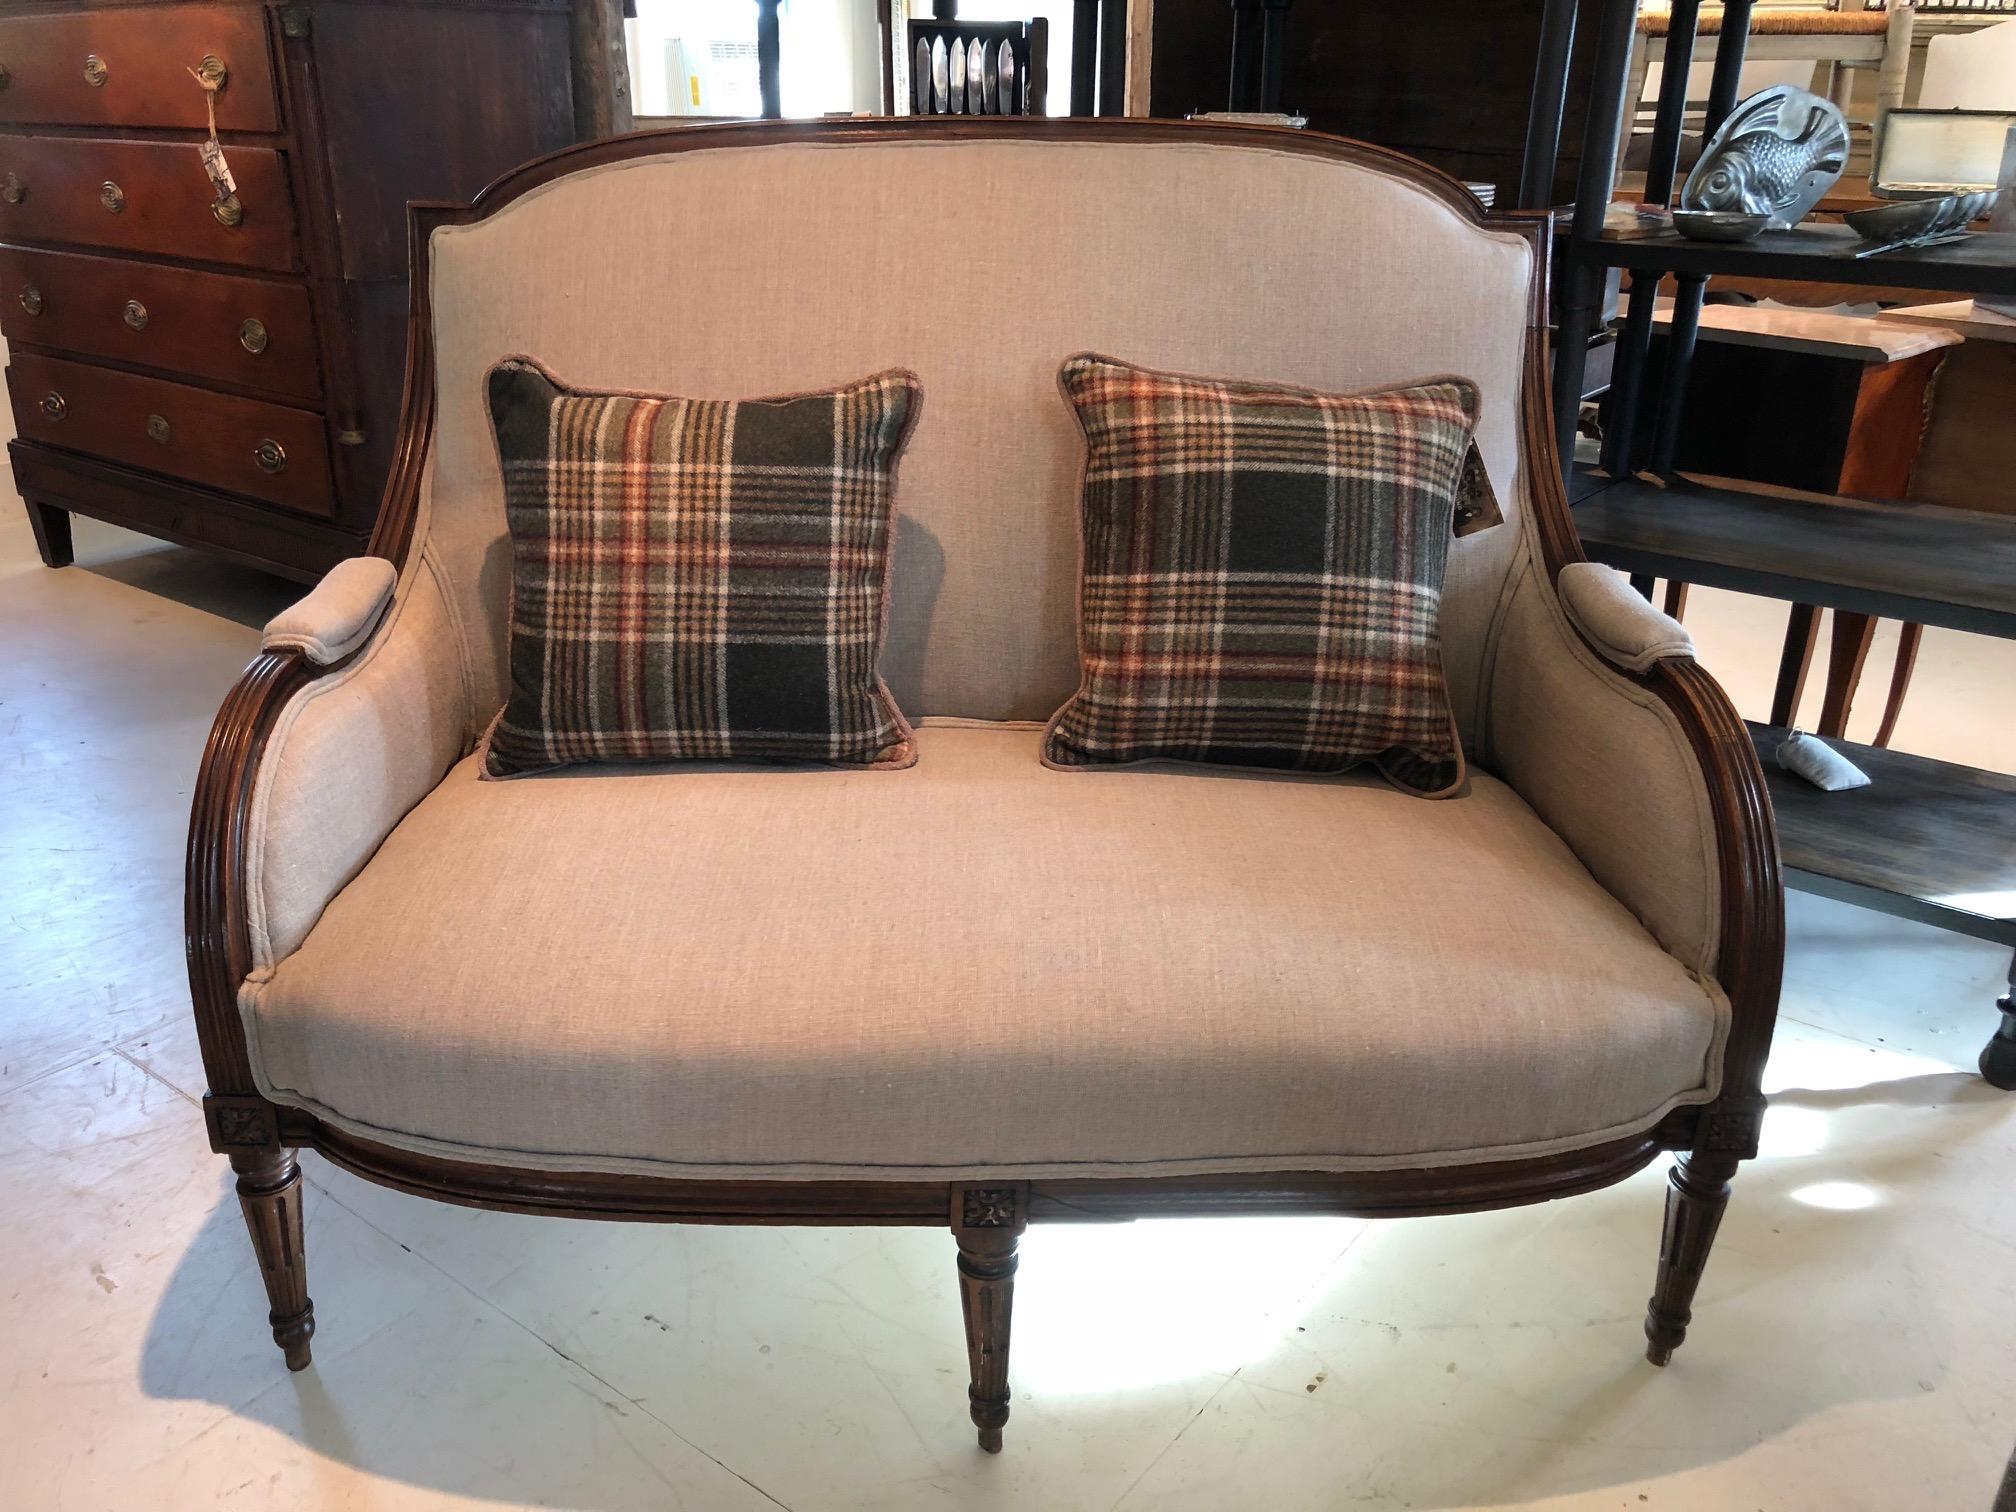 Wonderfully shaped French antique loveseat having elegant carved wood frame, curvy arms and fluted legs, newly upholstered in a neutral sand colored linen.
Measures: Arm height 23
Seat height 15.